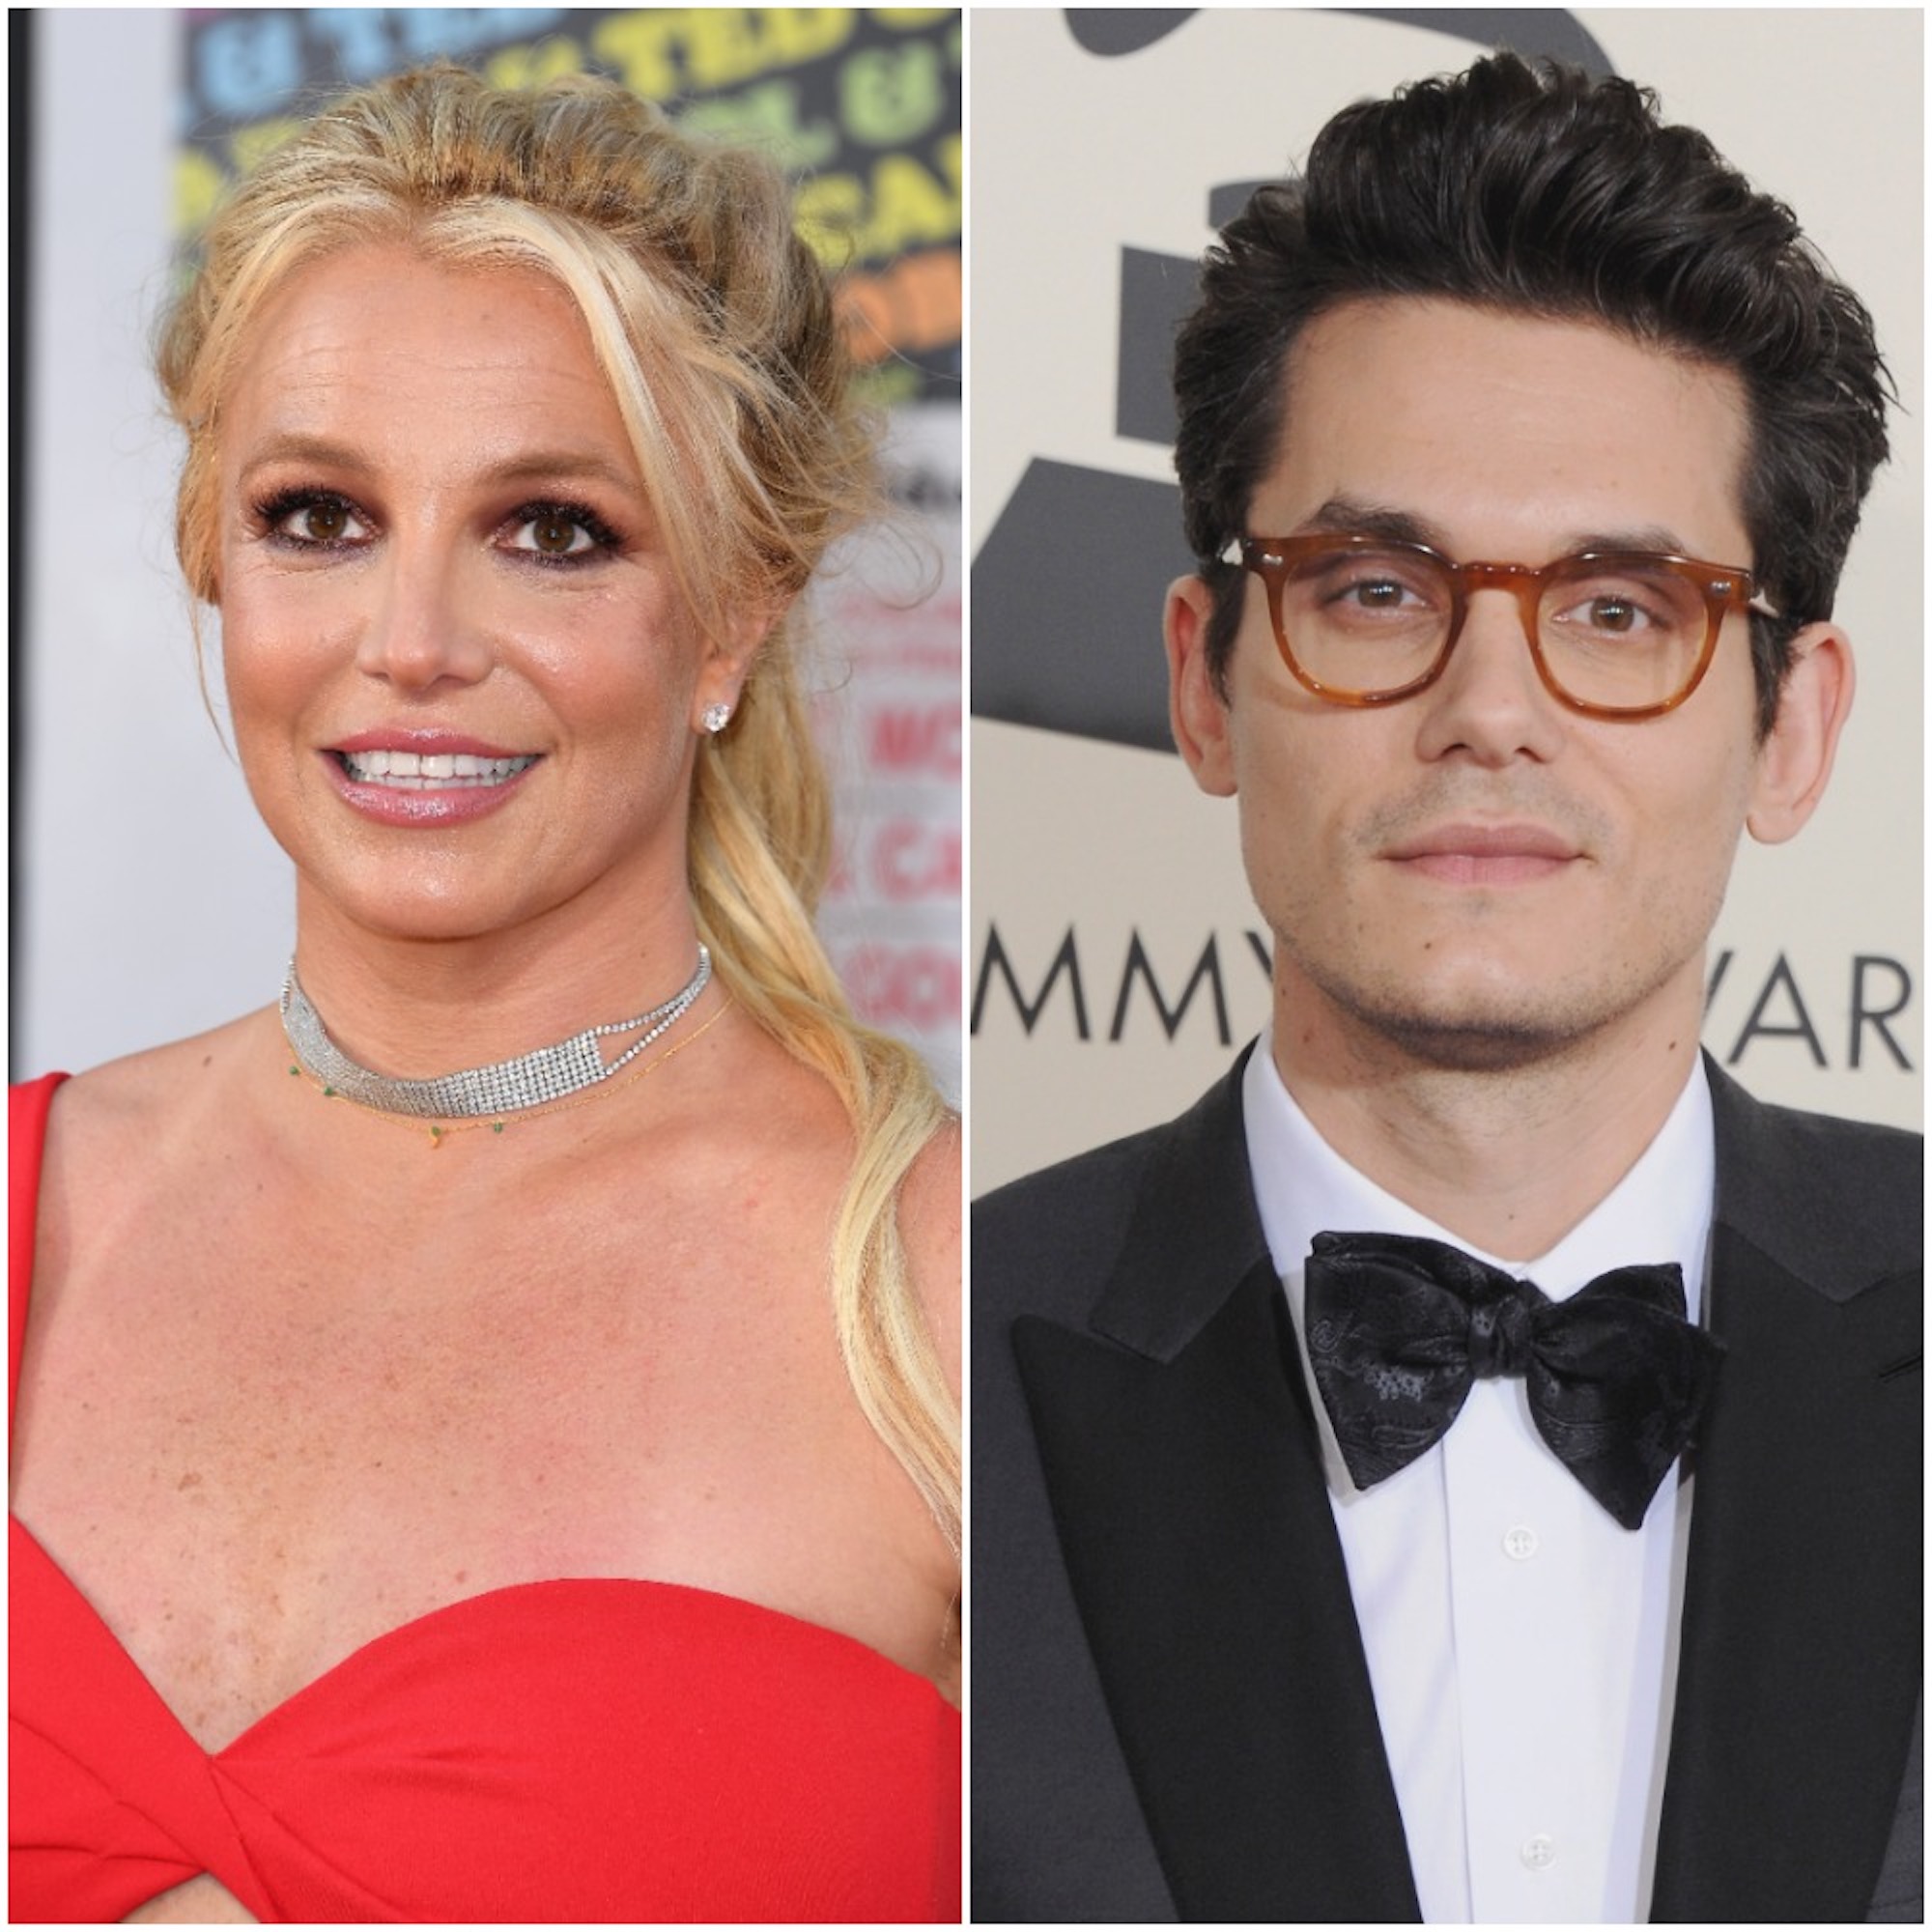 Britney Spears and John Mayer